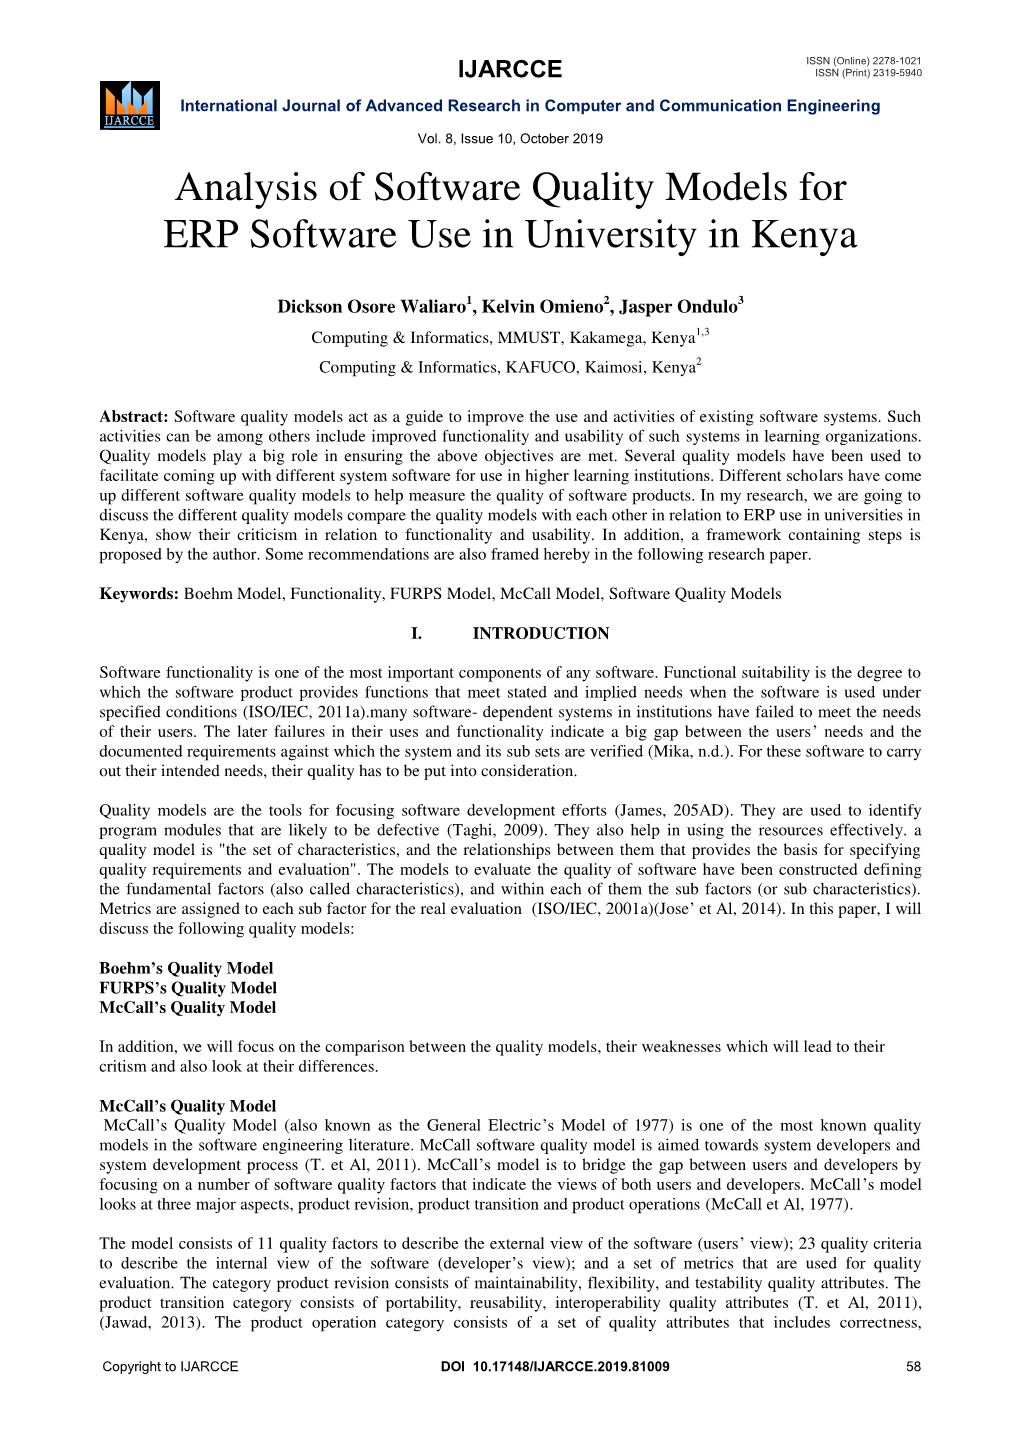 Analysis of Software Quality Models for ERP Software Use in University in Kenya